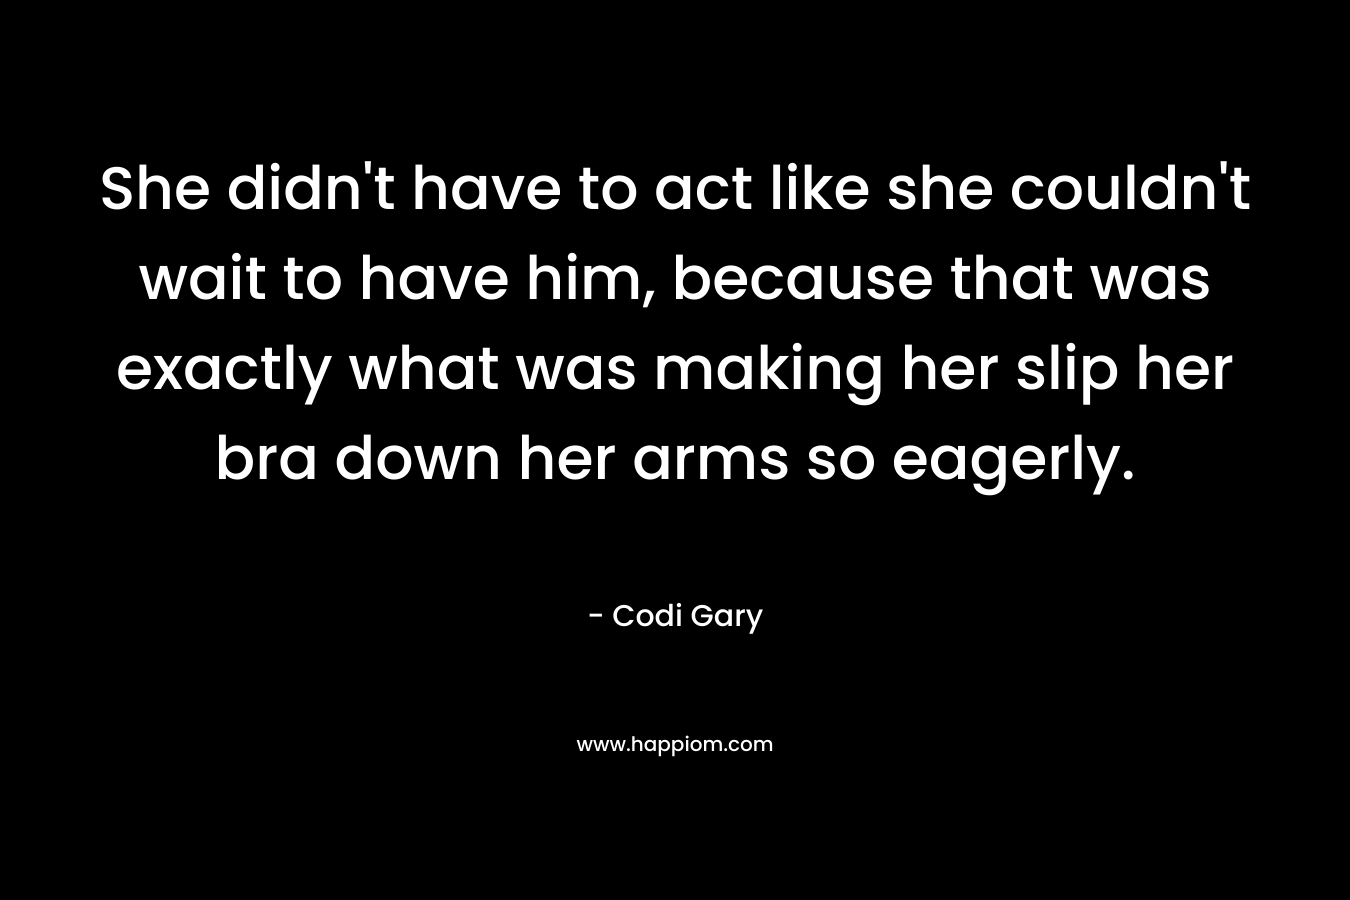 She didn’t have to act like she couldn’t wait to have him, because that was exactly what was making her slip her bra down her arms so eagerly. – Codi Gary